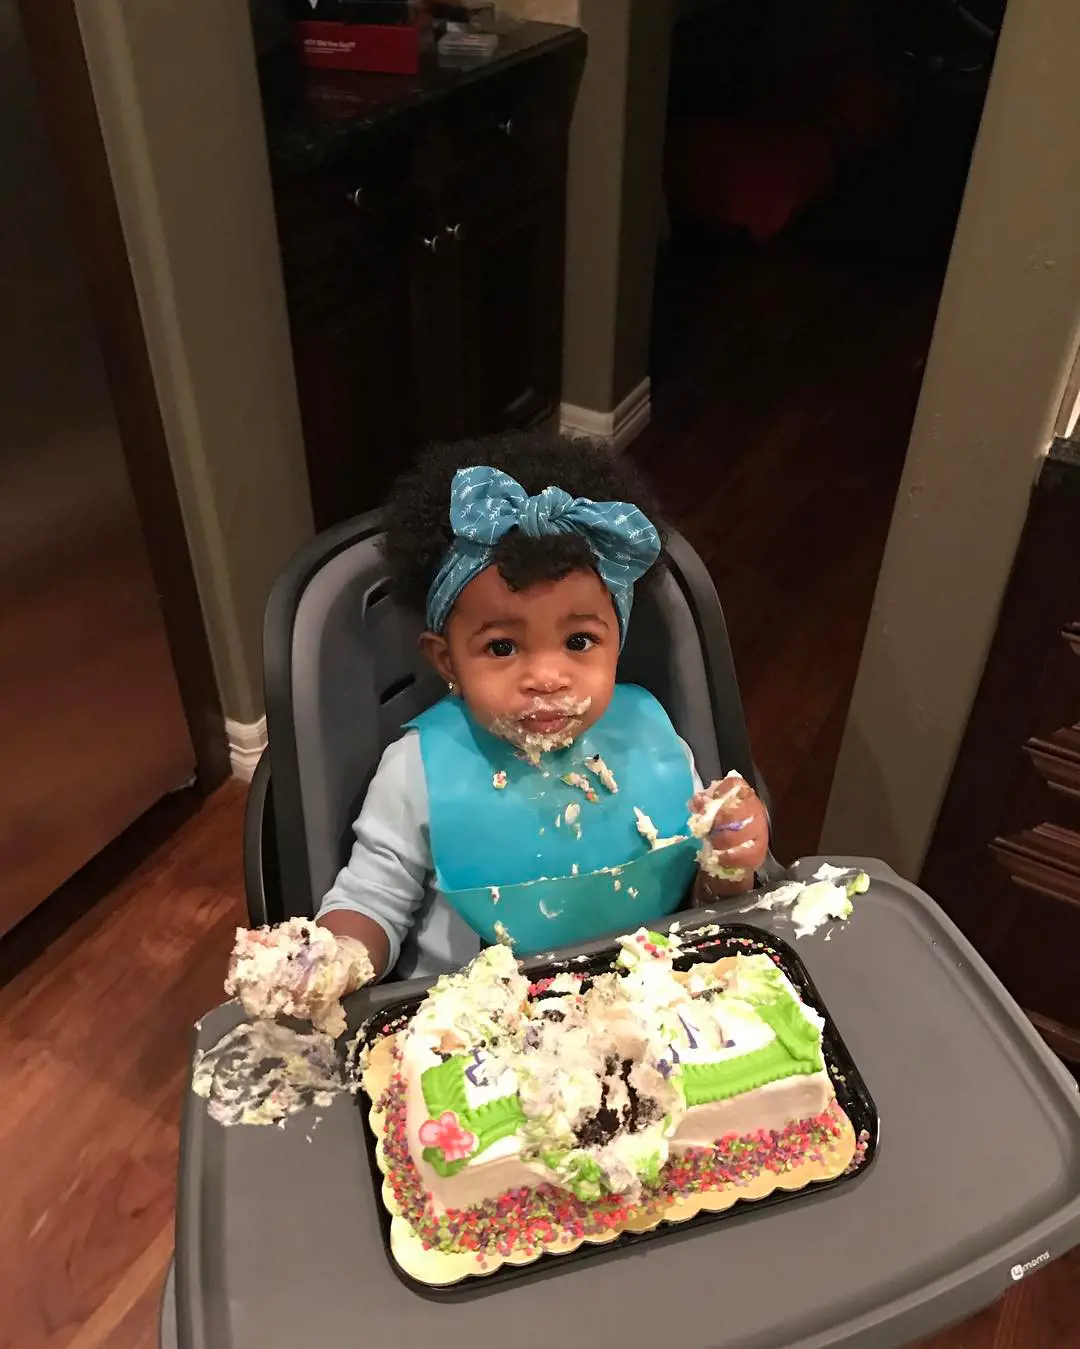 Kenzie on her first birthday in January 2017